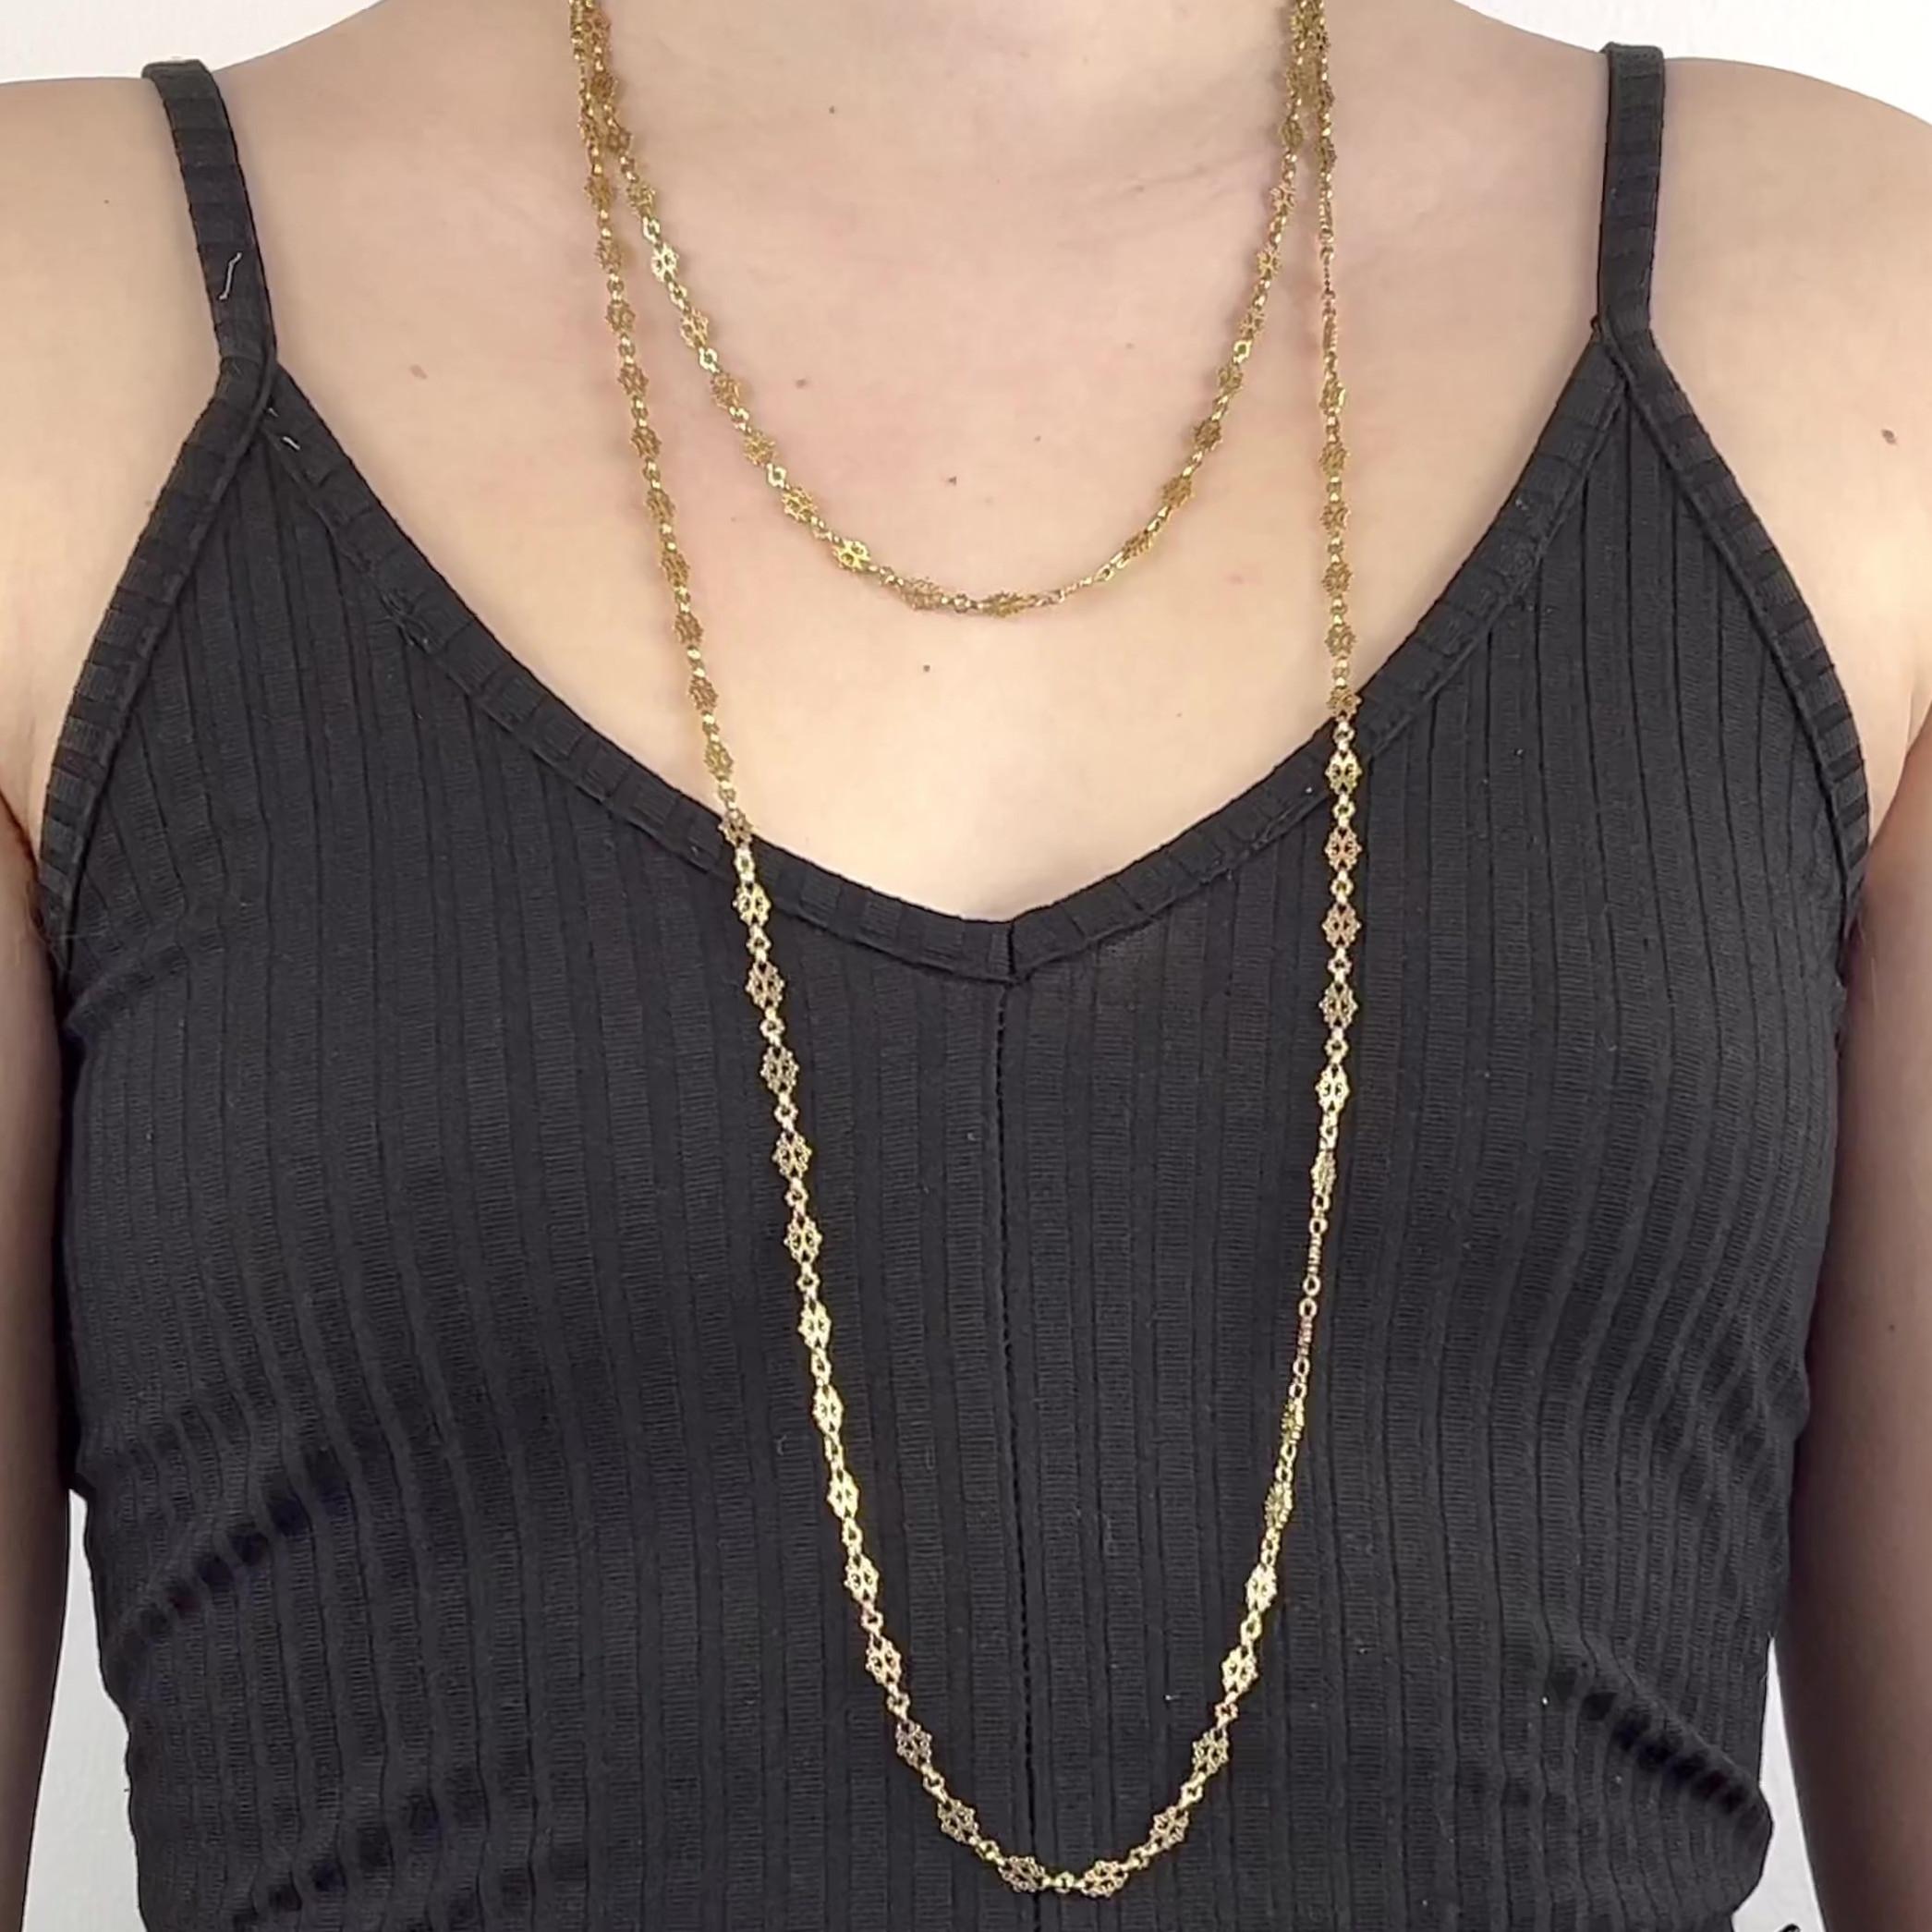 One French 55 Inch 18 Karat Gold Fancy Link Chain. Crafted in 18 karat yellow gold with French hallmarks. The necklace measures 55 inches in length. 

About this Item: Appreciate the old times with this Antique French Gold Fancy Link Chain. This